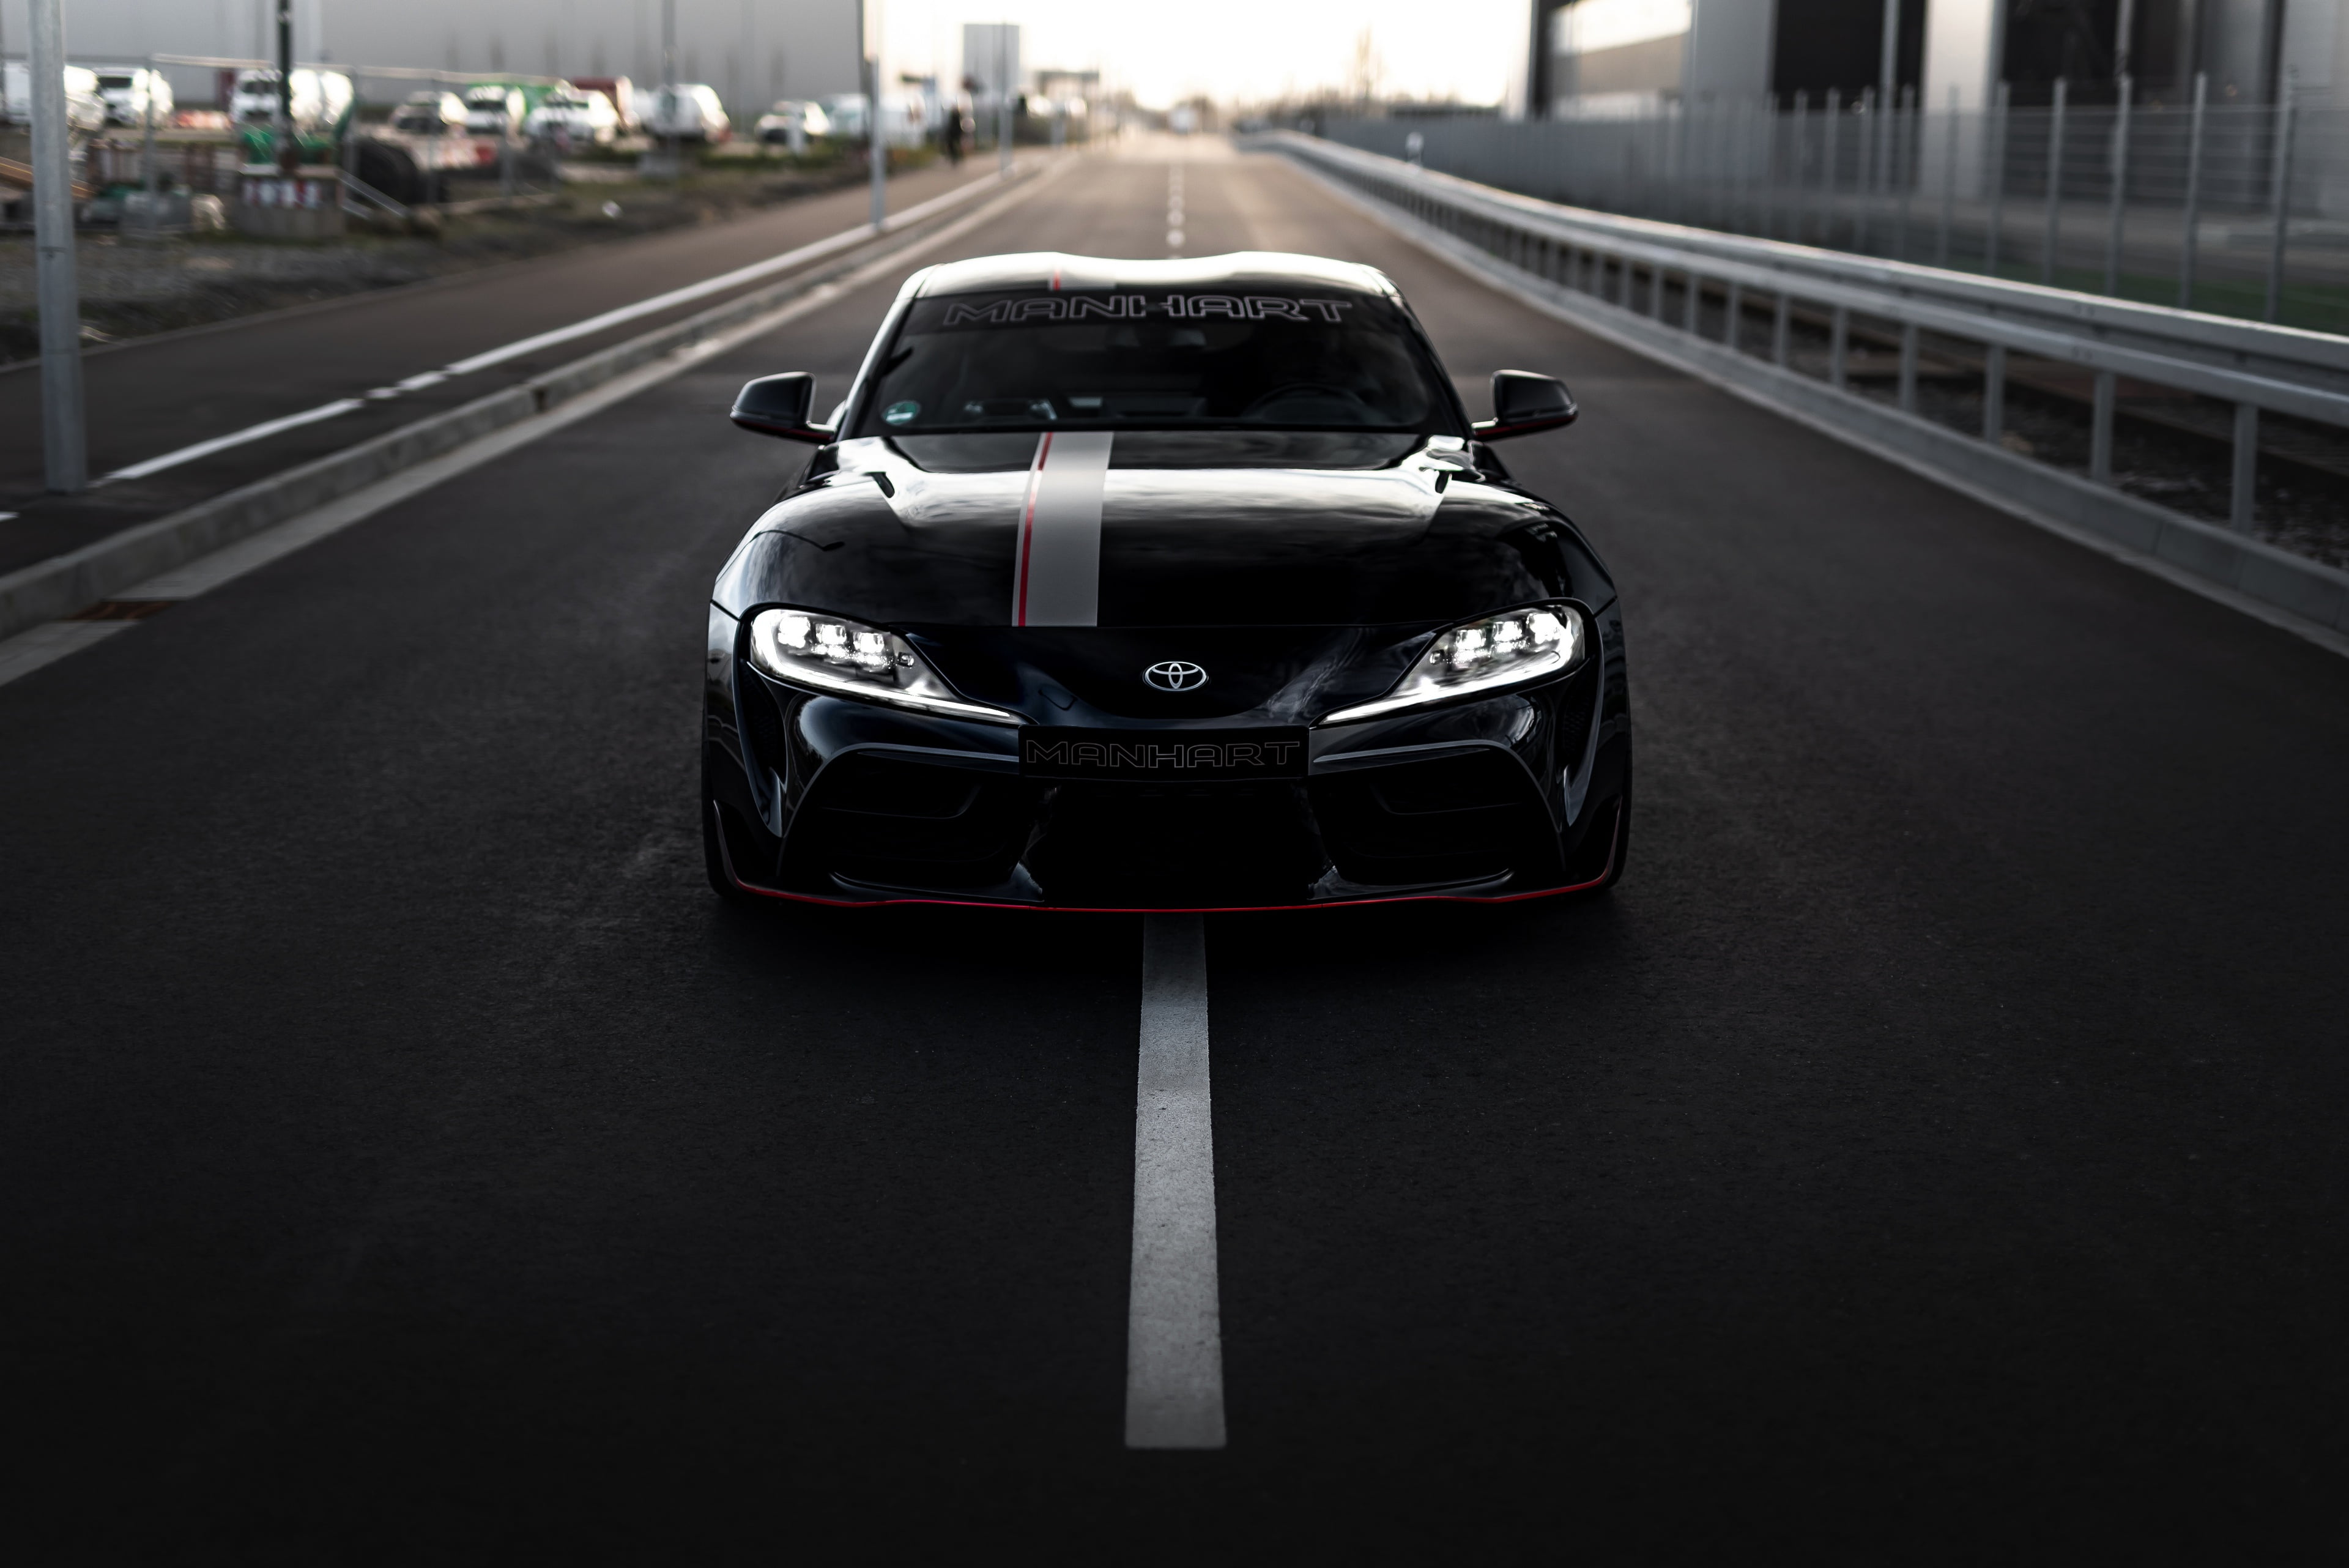 road, asphalt, markup, black, street, coupe, Toyota, front view